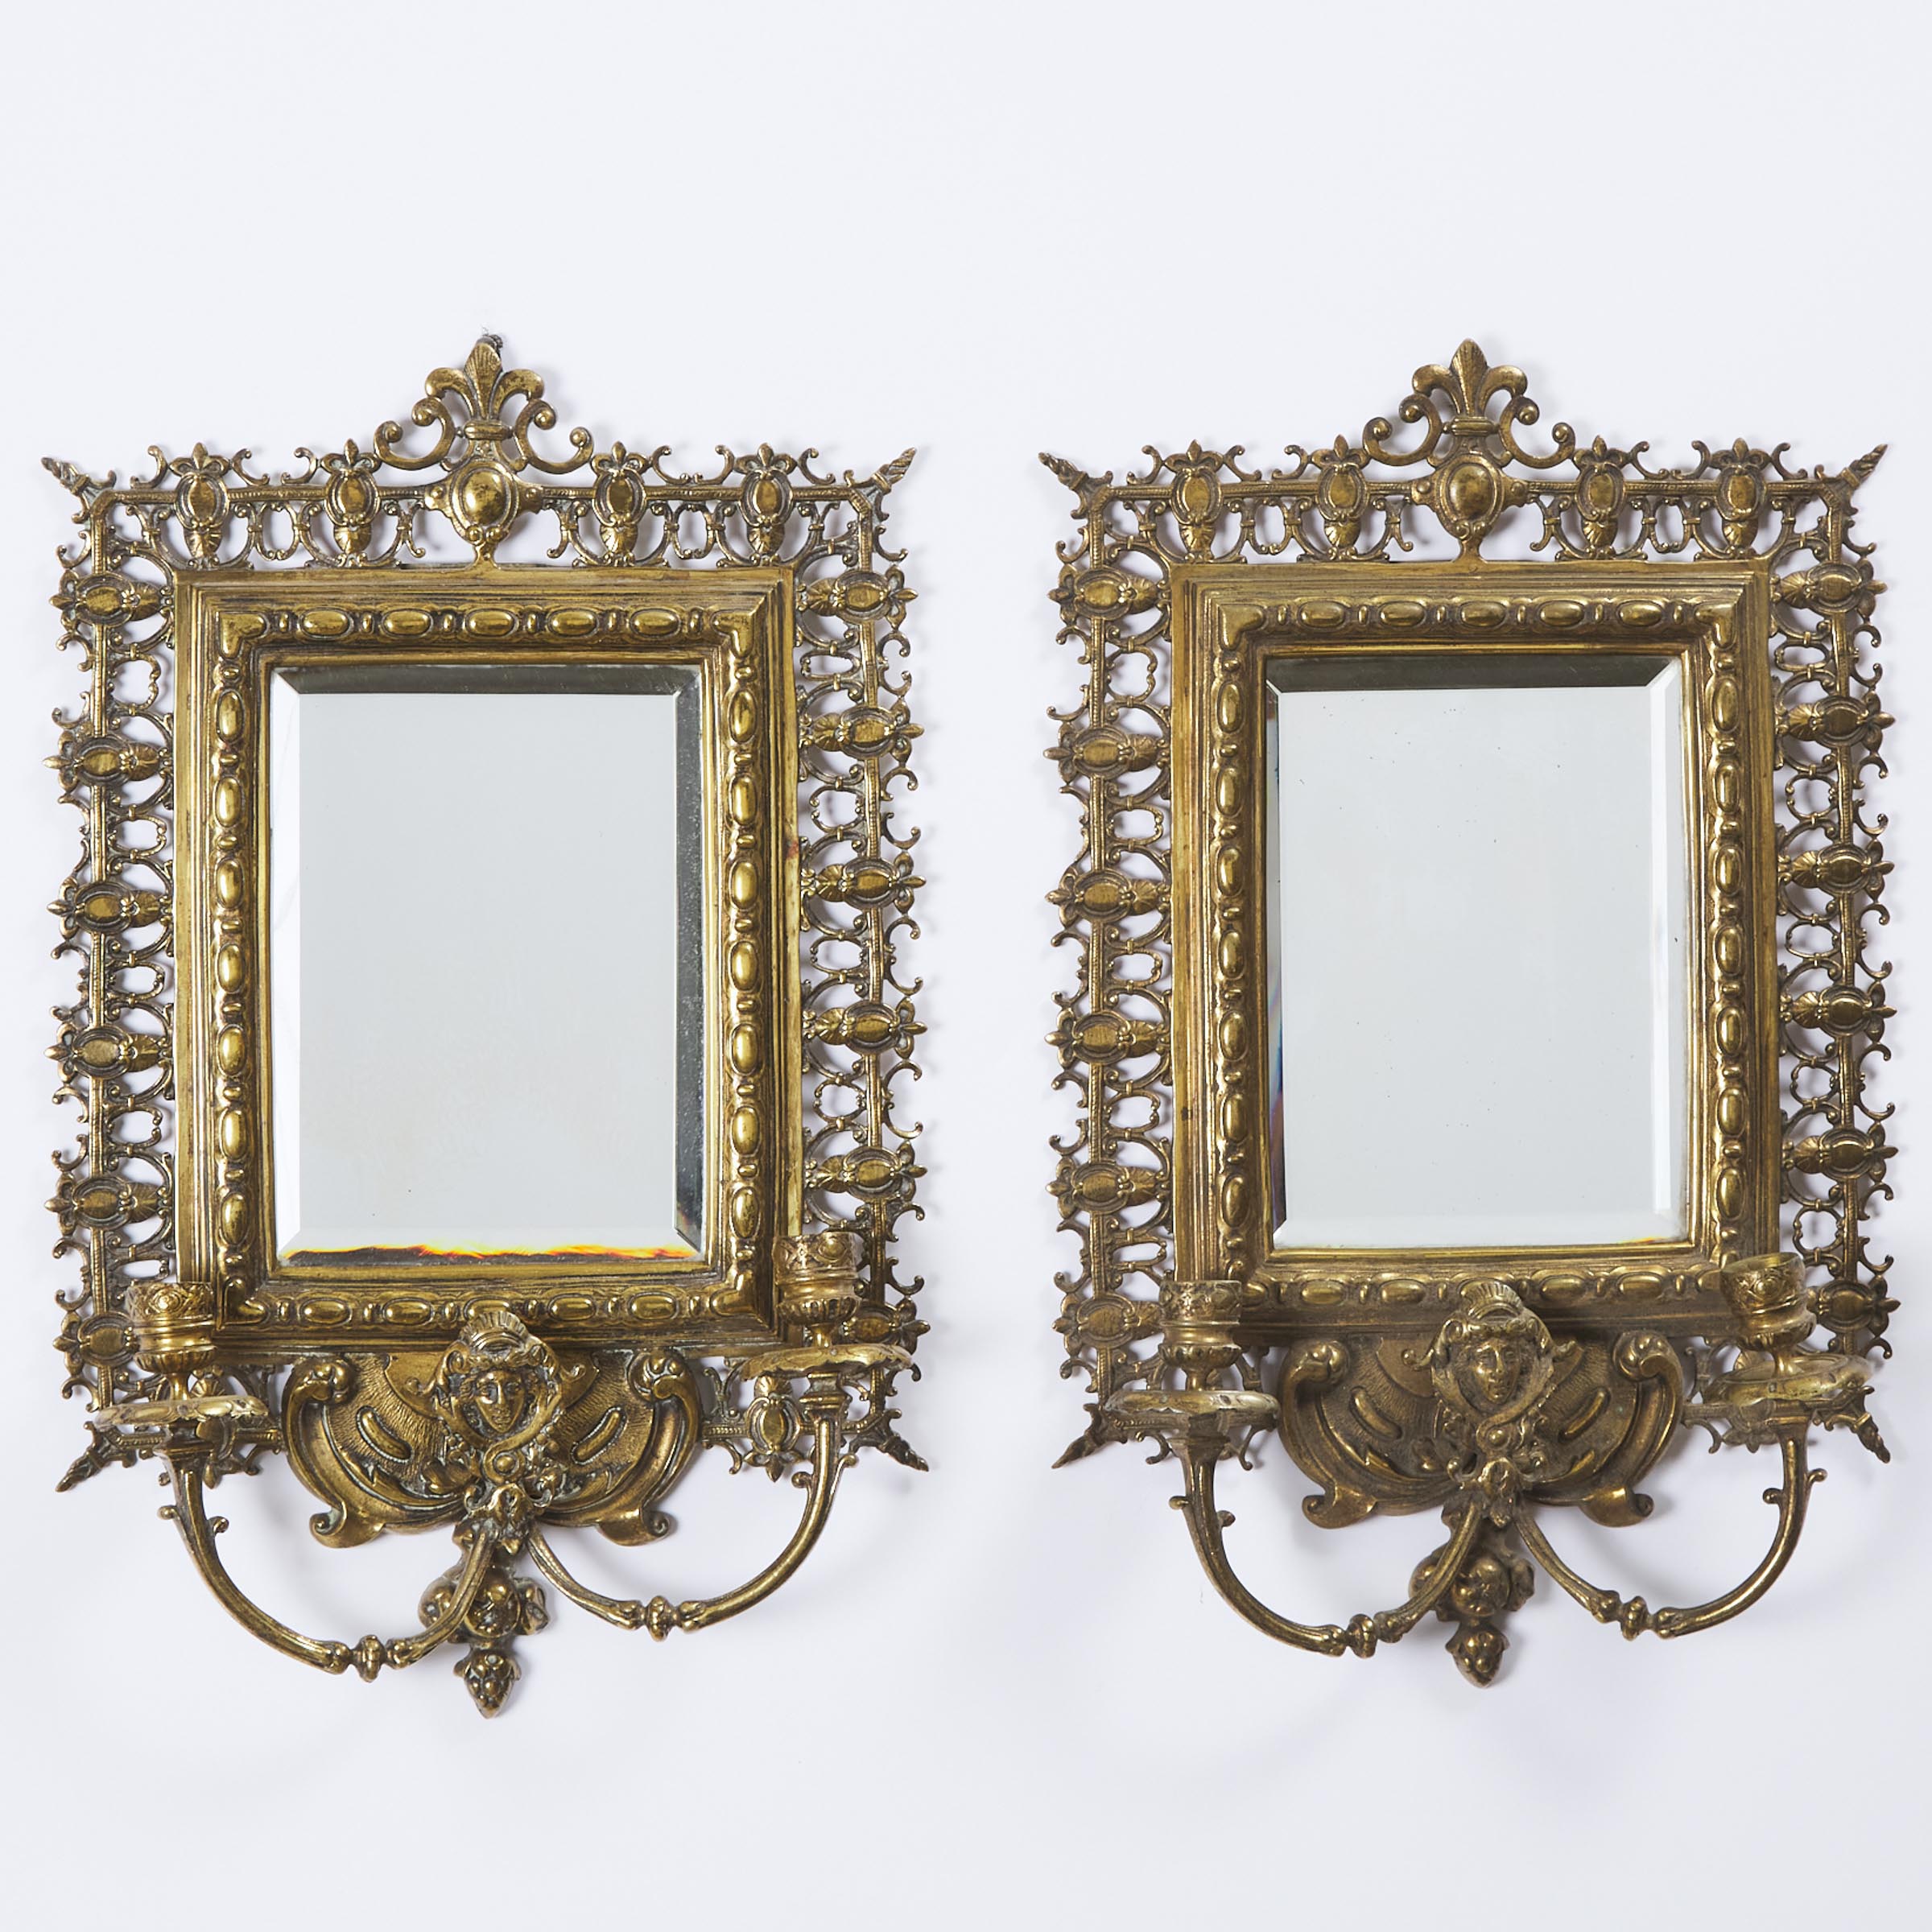 Pair of Renaissance Revival Lacquered Brass Two Light Mirrored Wall Sconces, late 19th century